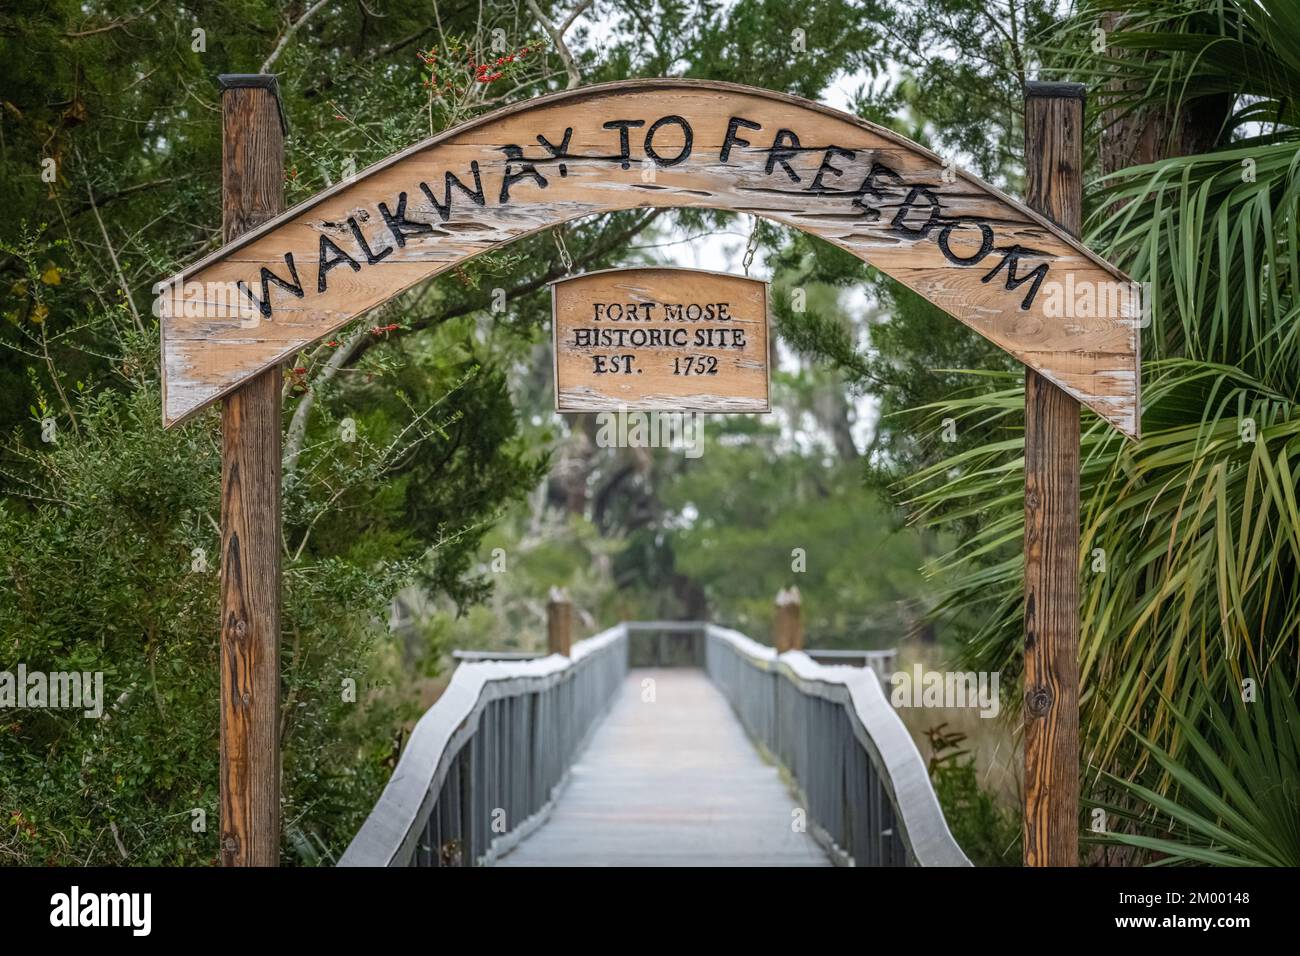 Walkway to Freedom at Fort Mose Historic State Park in St. Augustine, FL, site of America's 18th century free black settlement for escaped slaves. Stock Photo